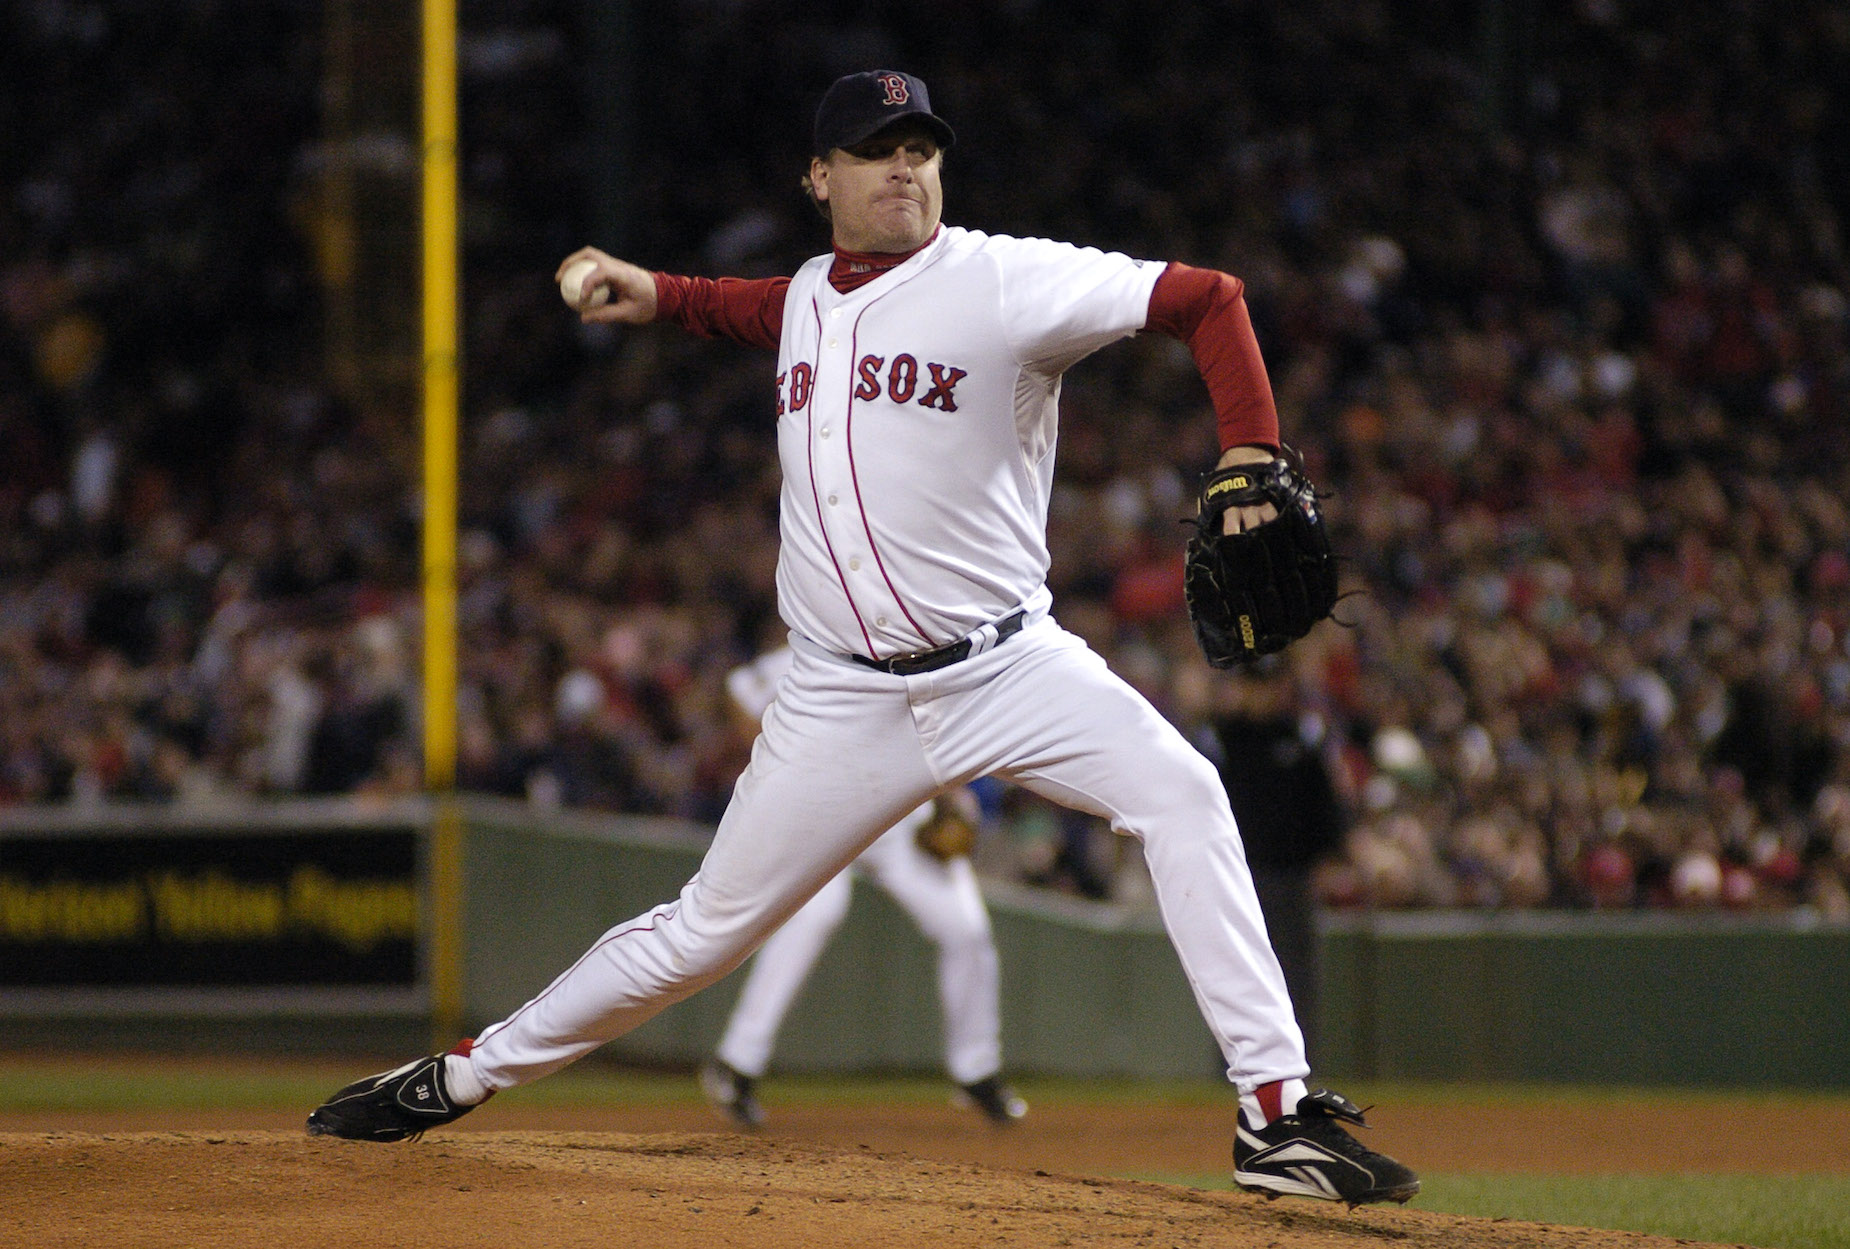 Controversial pitcher Curt Schilling once received a $15,000 fine for smashing a camera.